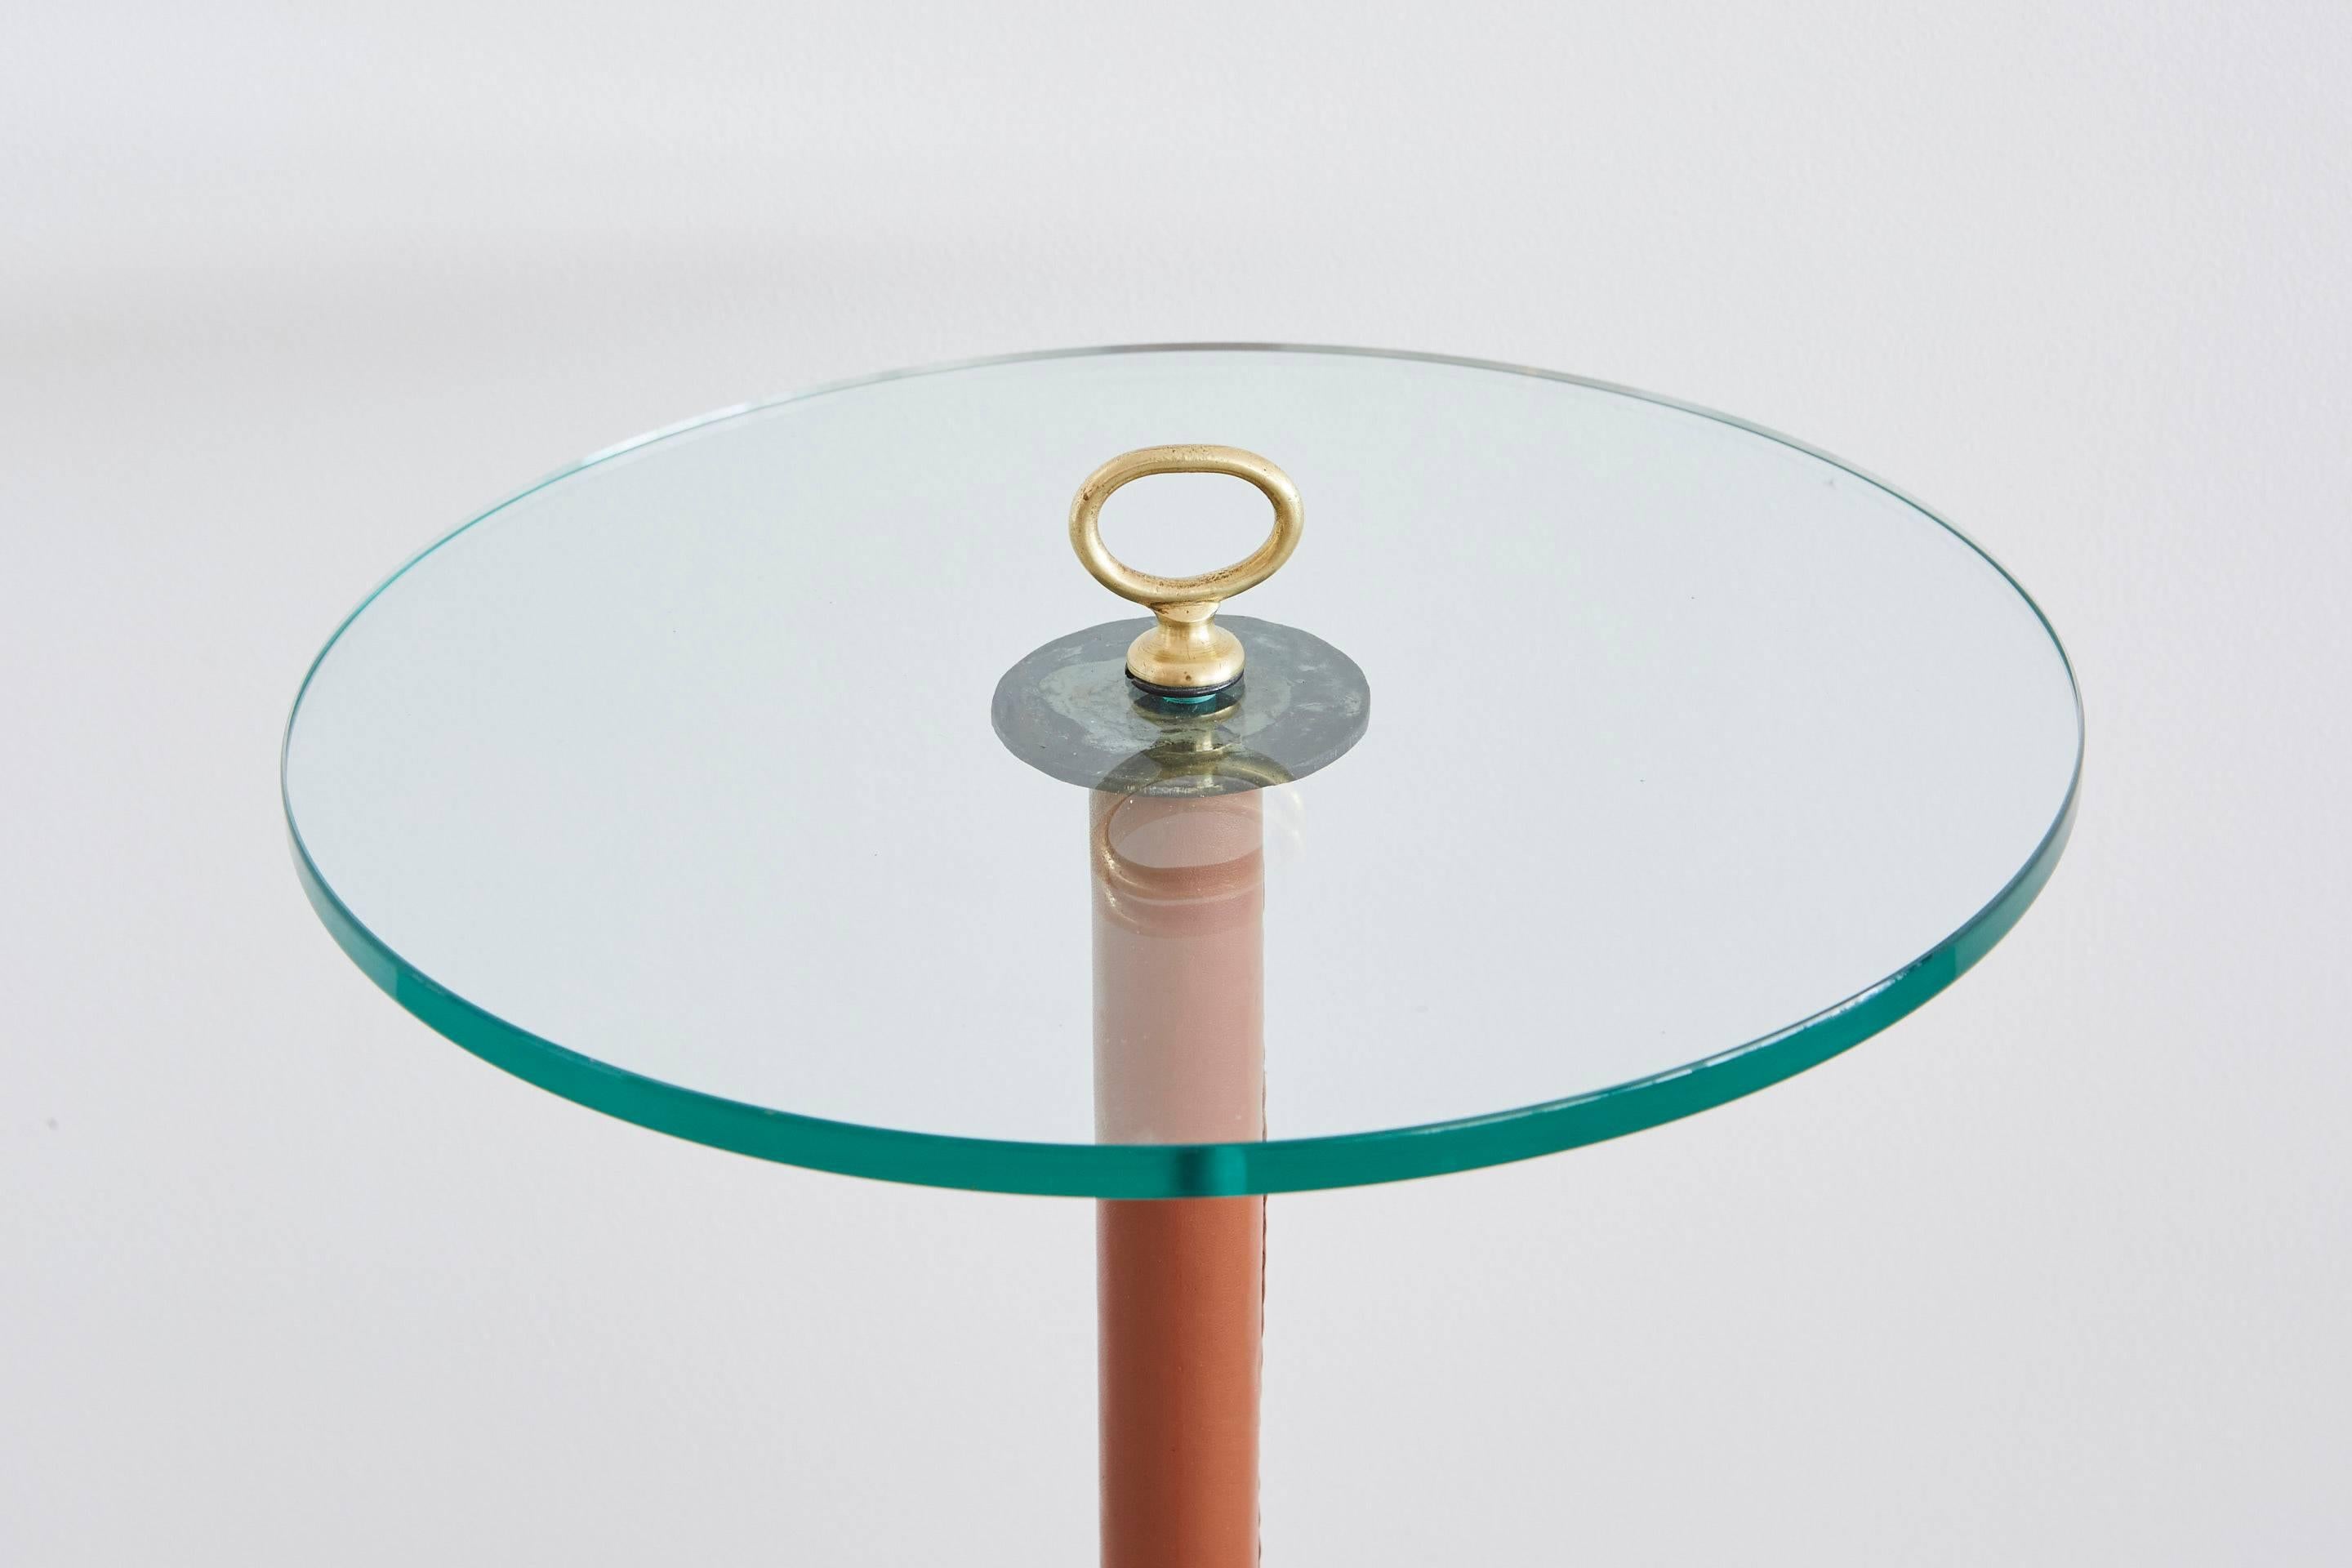 Petite side table by Jacques Adnet in saddle leather with brass ring and new glass.
Could also be used with original brass ashtray stand.